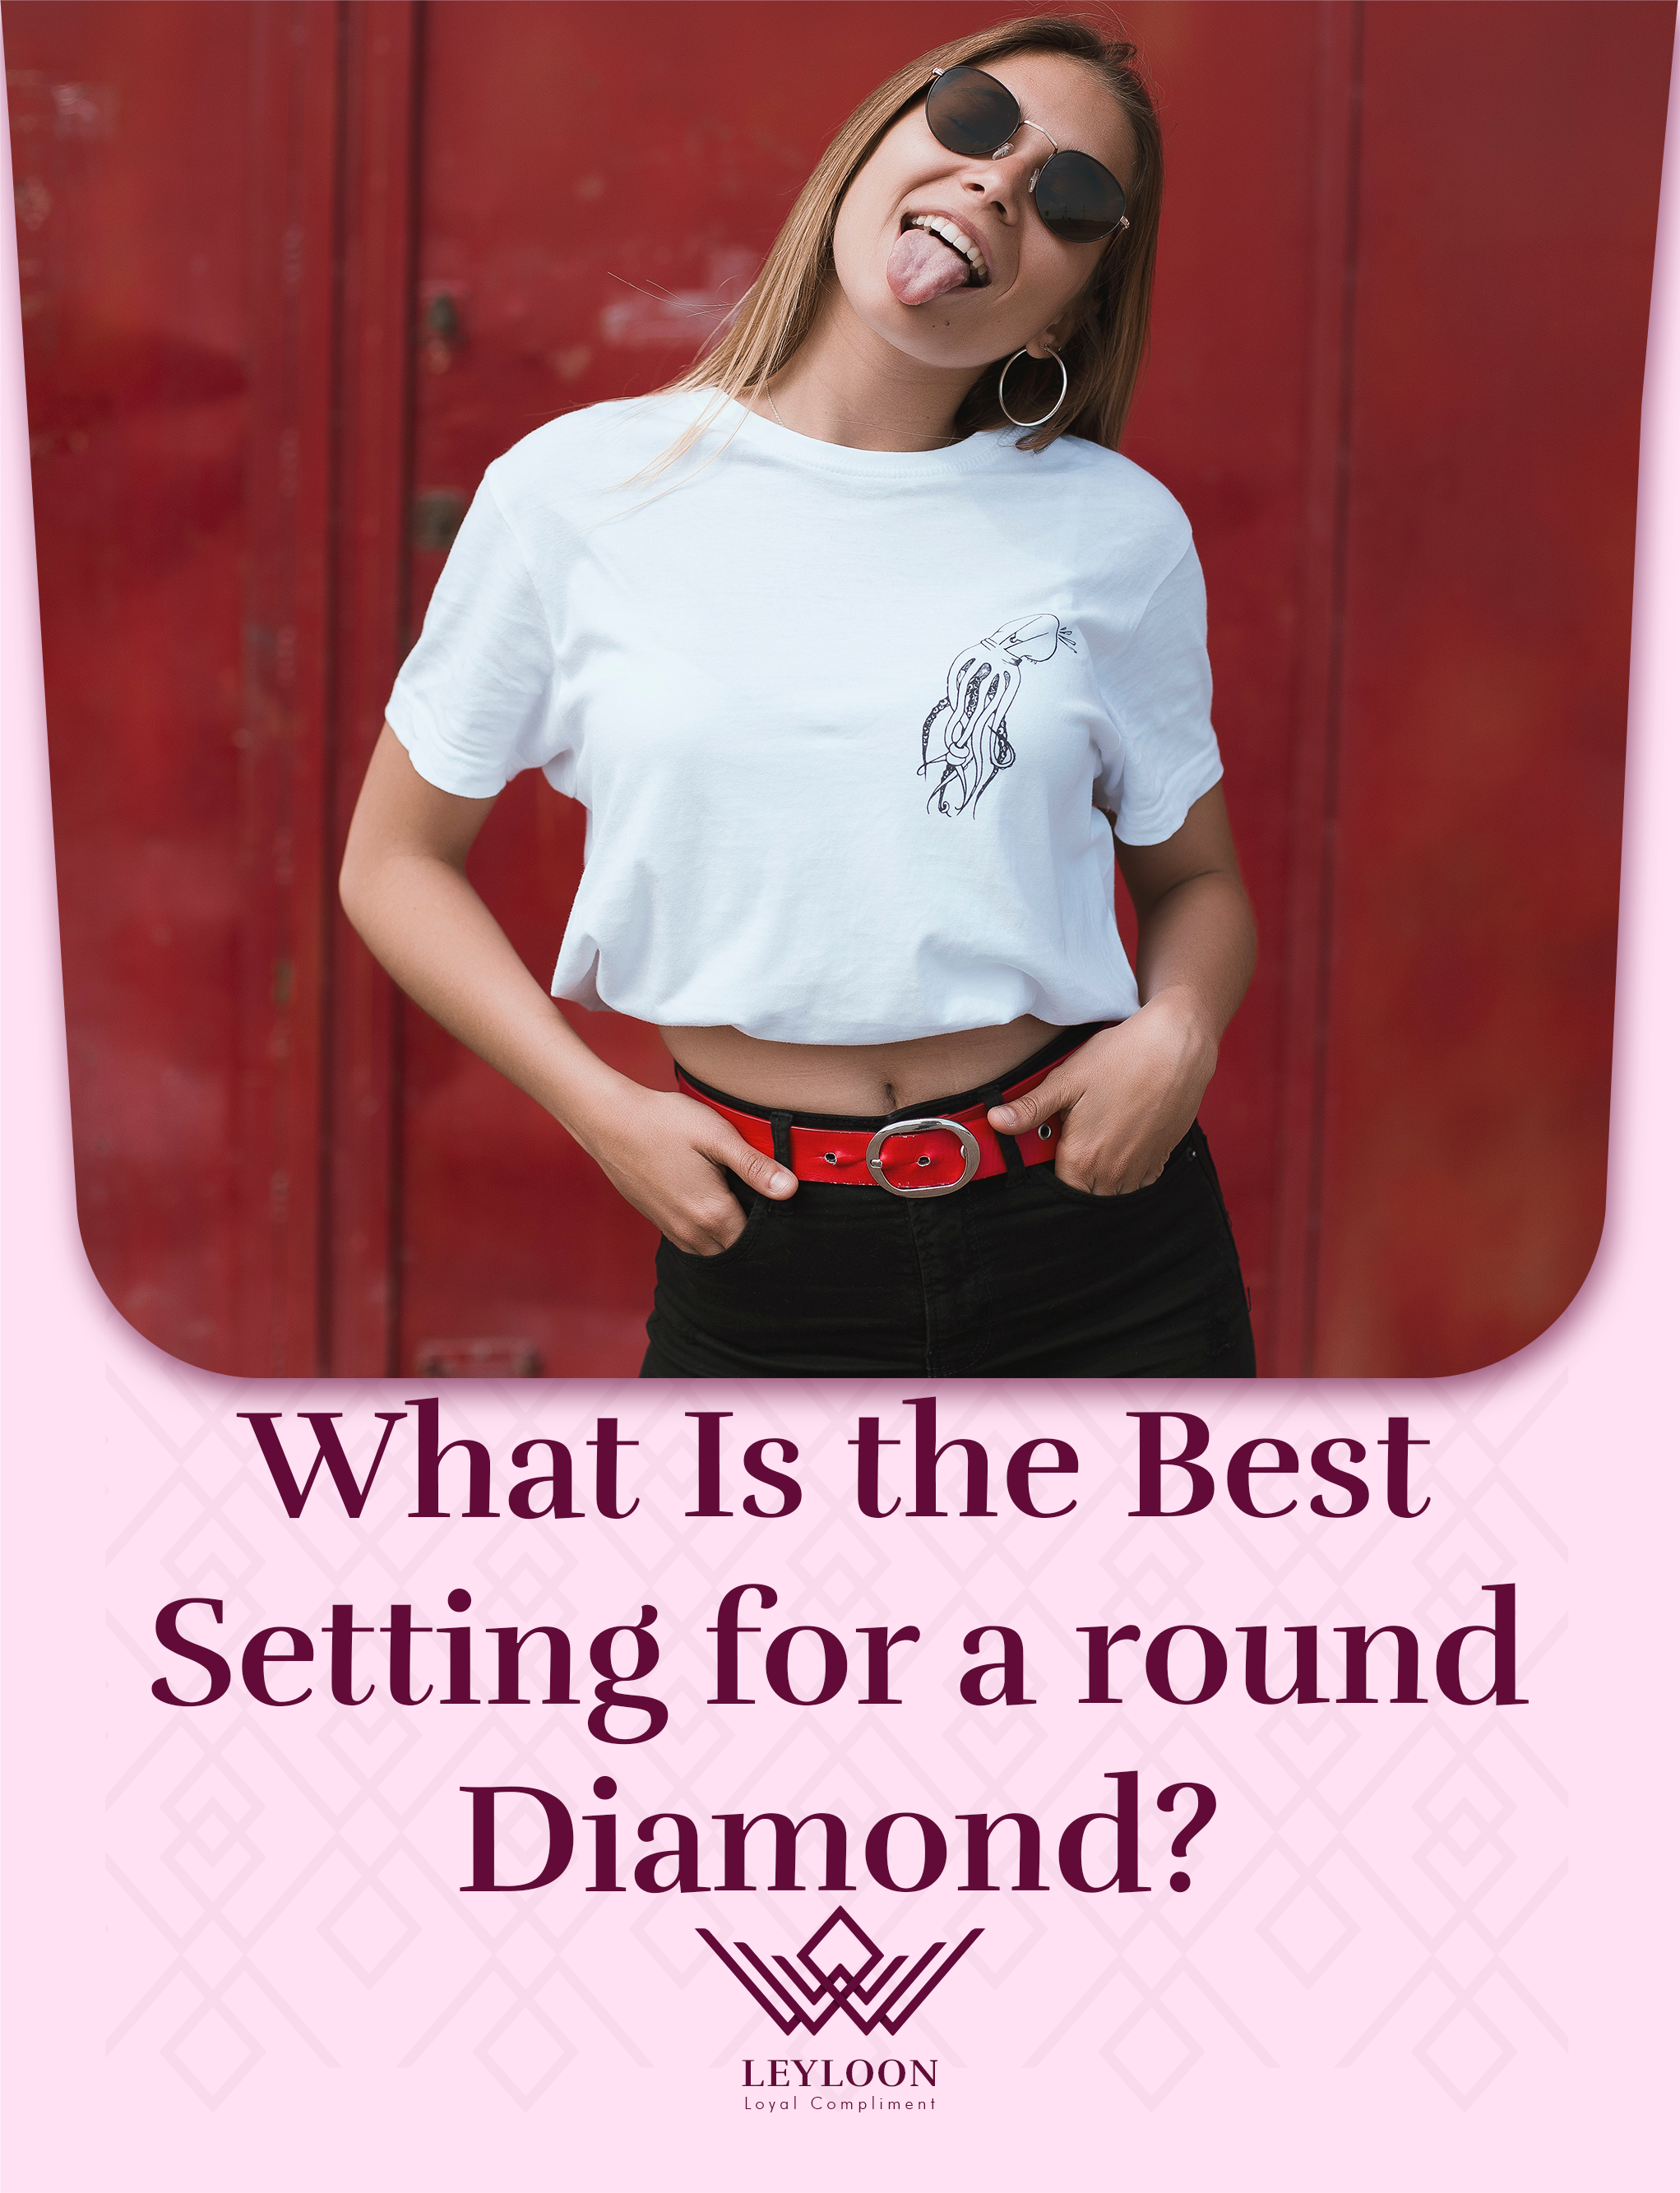 What Is the Best Setting for a round Diamond?